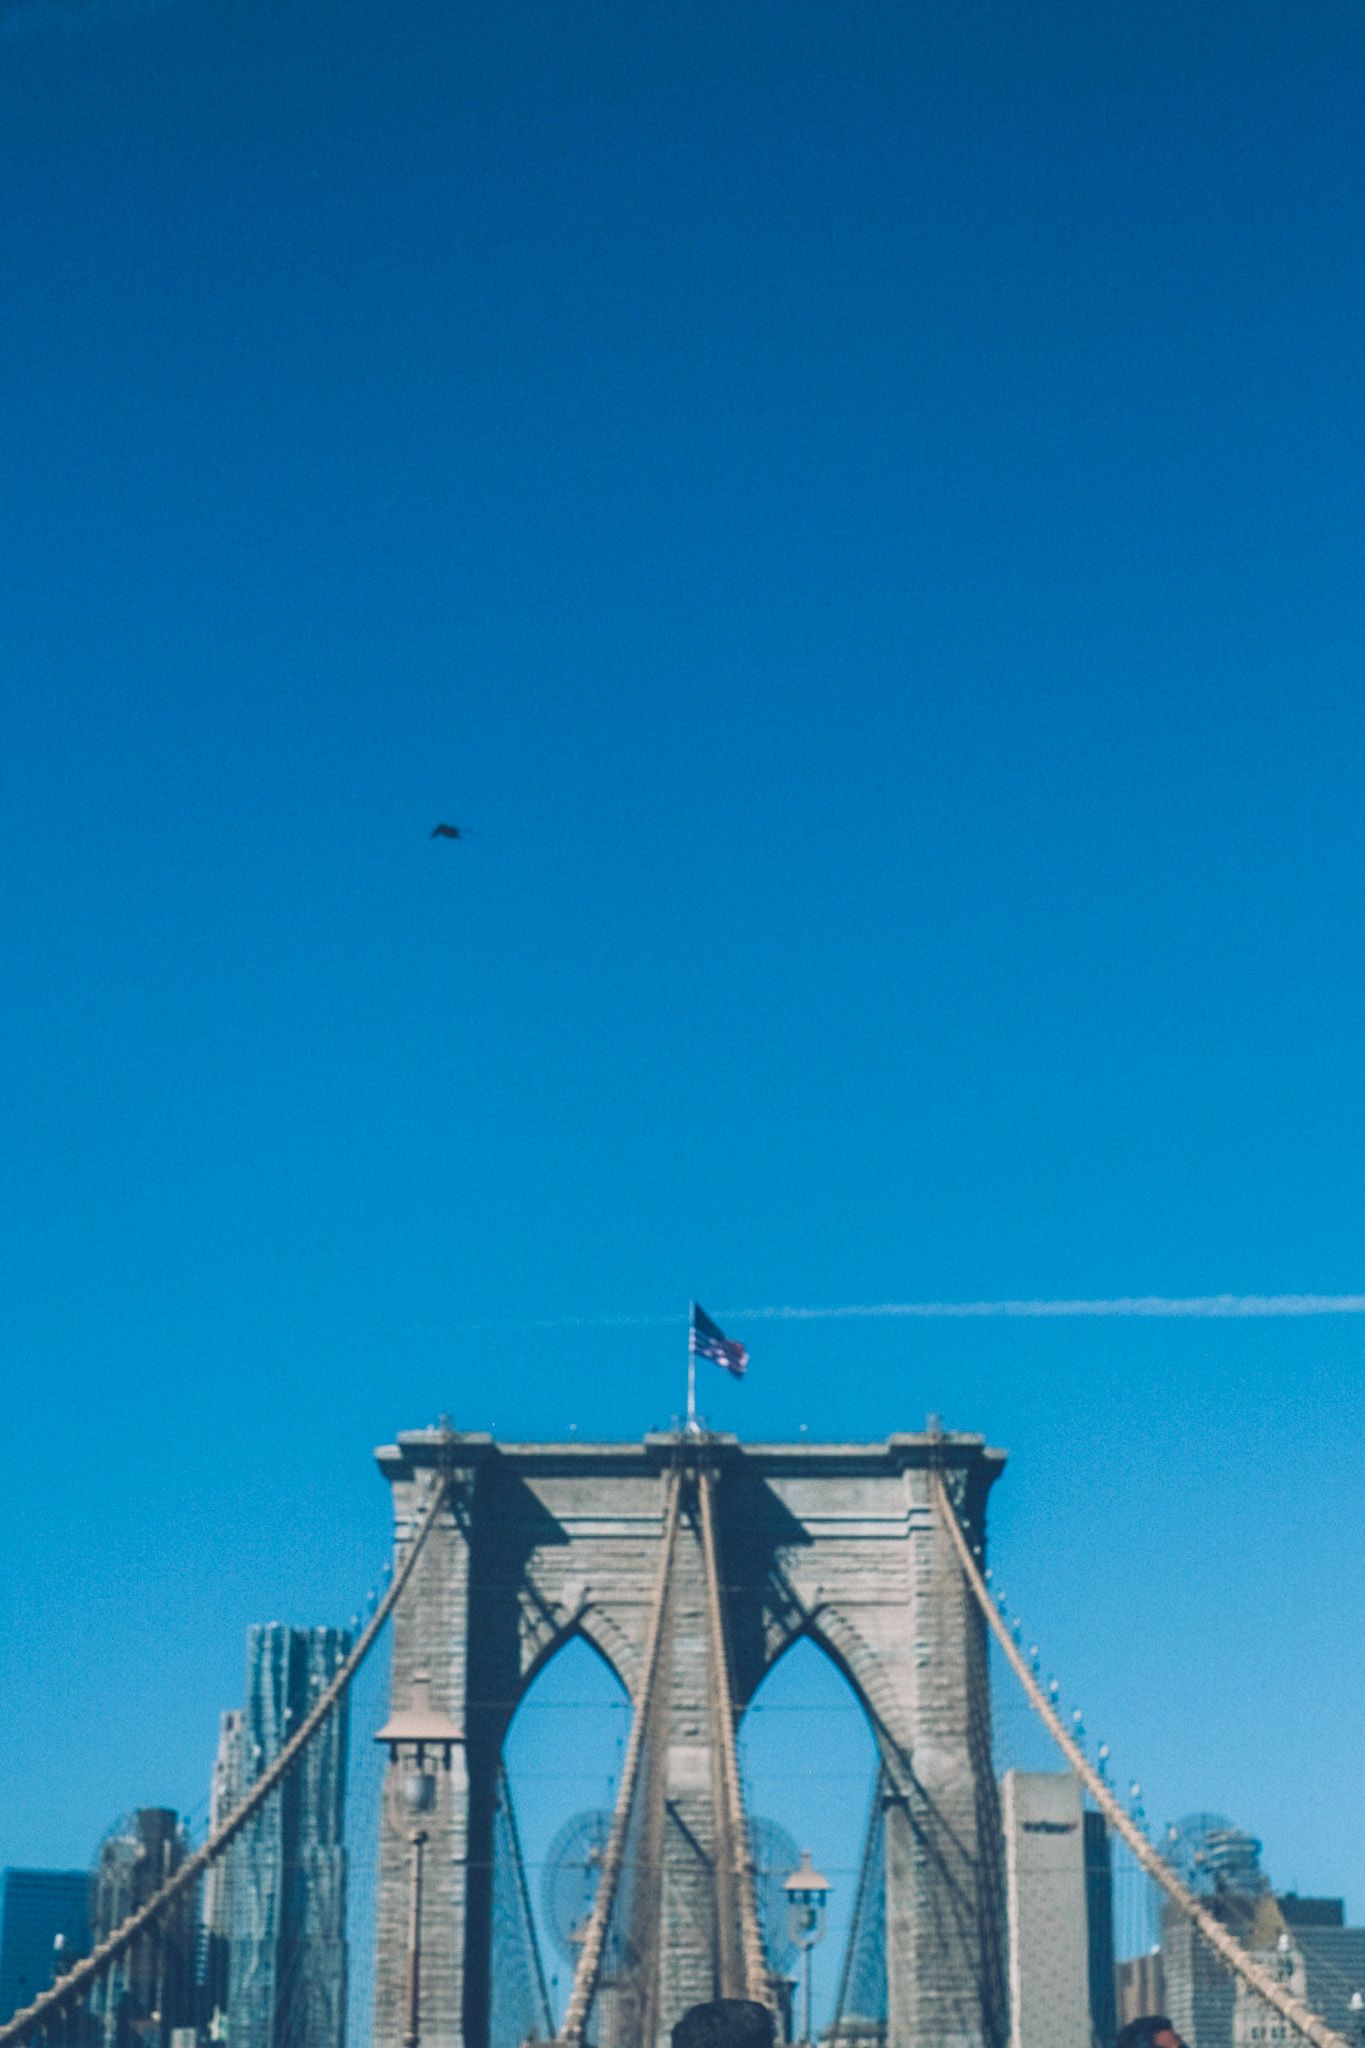 The Brooklyn Bridge rises from the bottom of the frame against a clear blue sky.